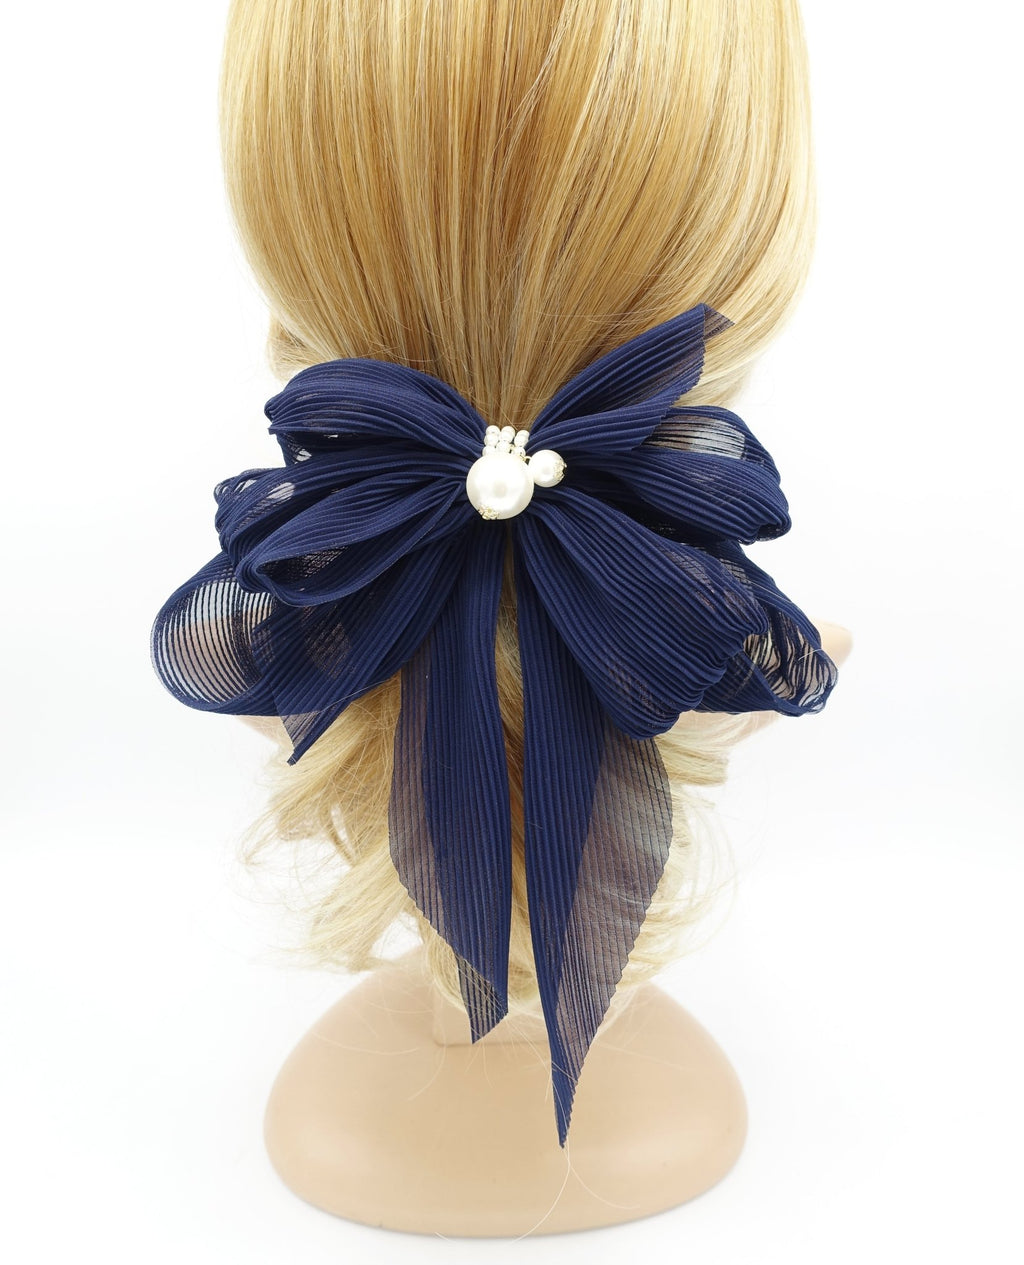 https://cdn.shopify.com/s/files/1/0686/2355/products/veryshine-com-claw-banana-barrette-navy-pleated-chiffon-hair-bow-pearl-embellished-long-tail-french-barrette-women-hair-accessory-27983200321641_1024x.jpg?v=1615969265